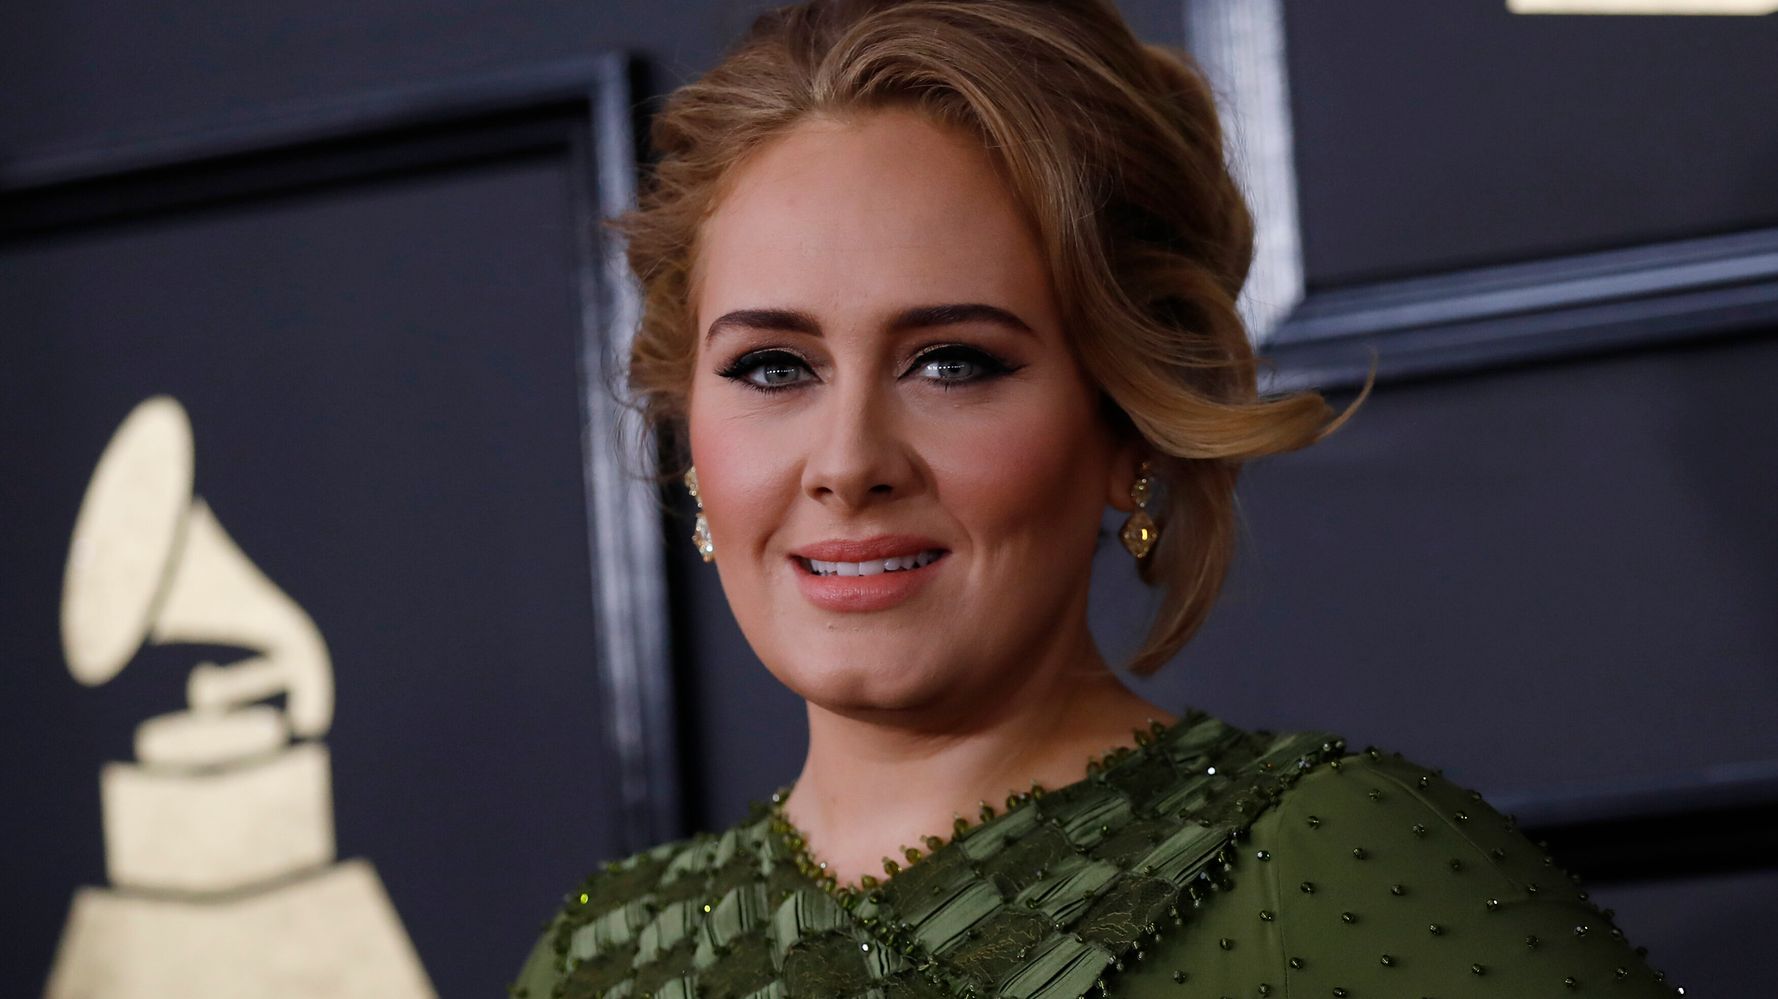 Newfoundland Woman Asks Adele To Meet For Tea After 3 Concert Cancellations | HuffPost ...